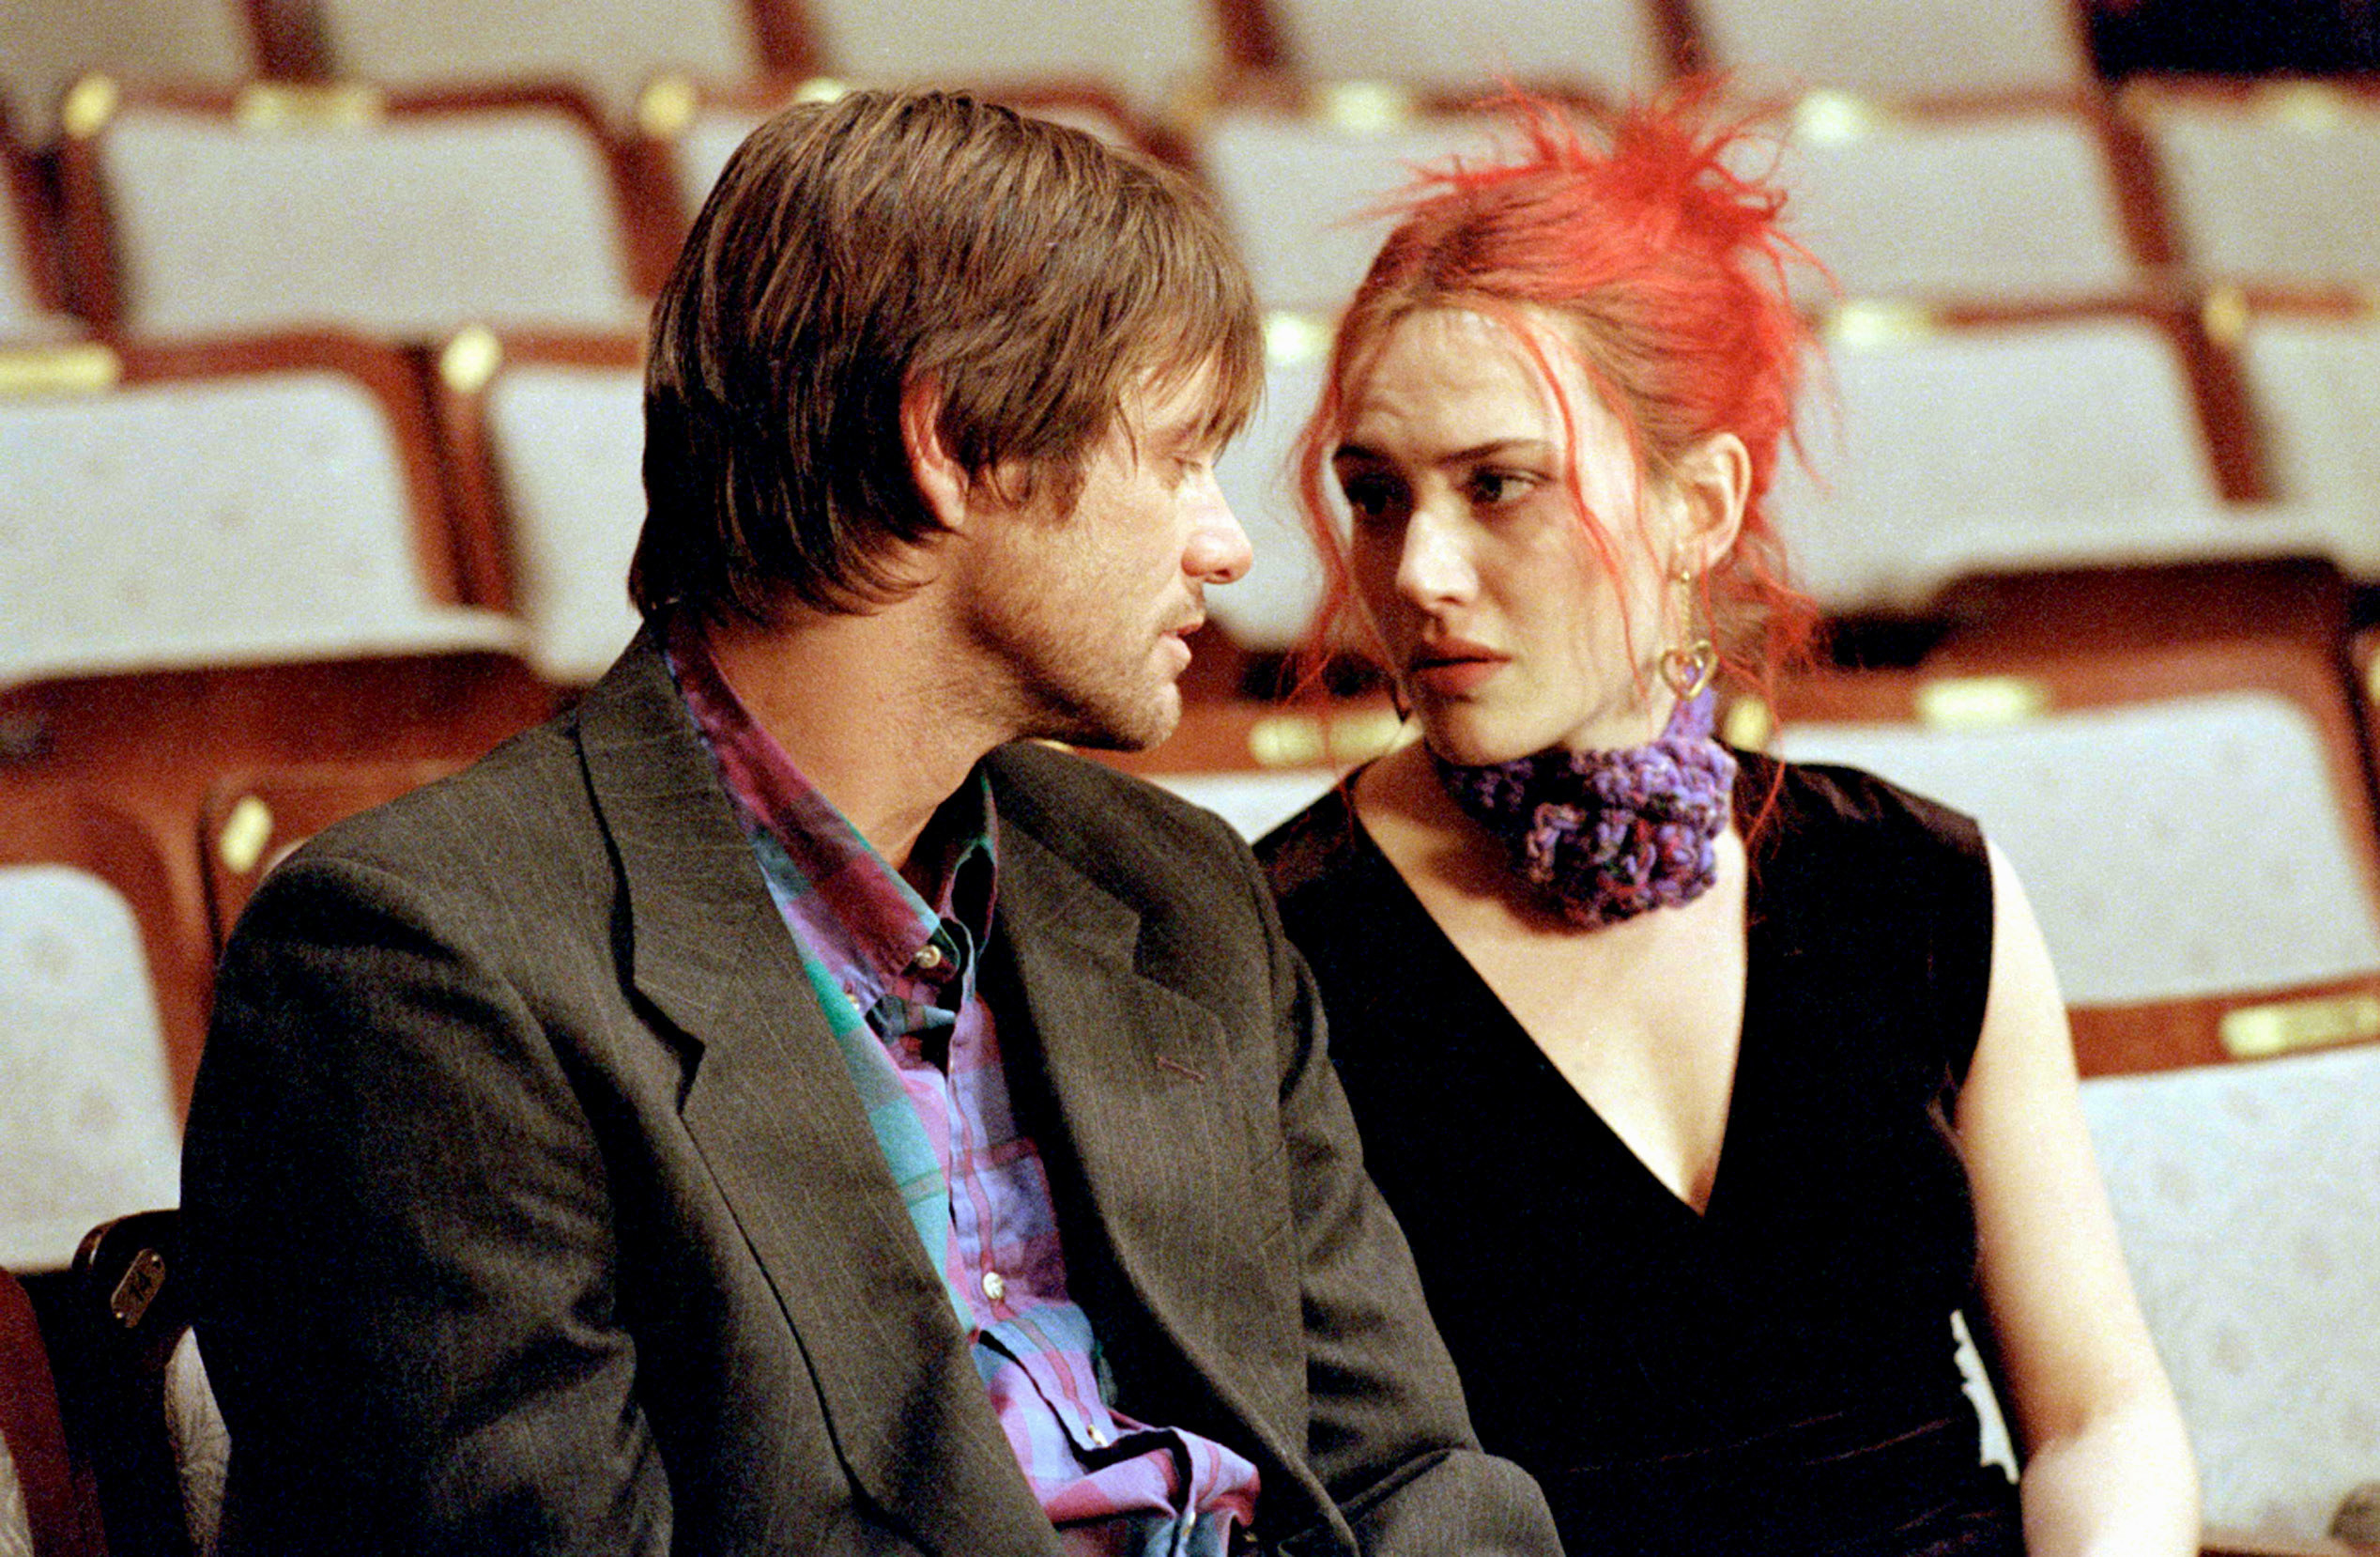 Jim Carrey and Kate Winslet sitting together.